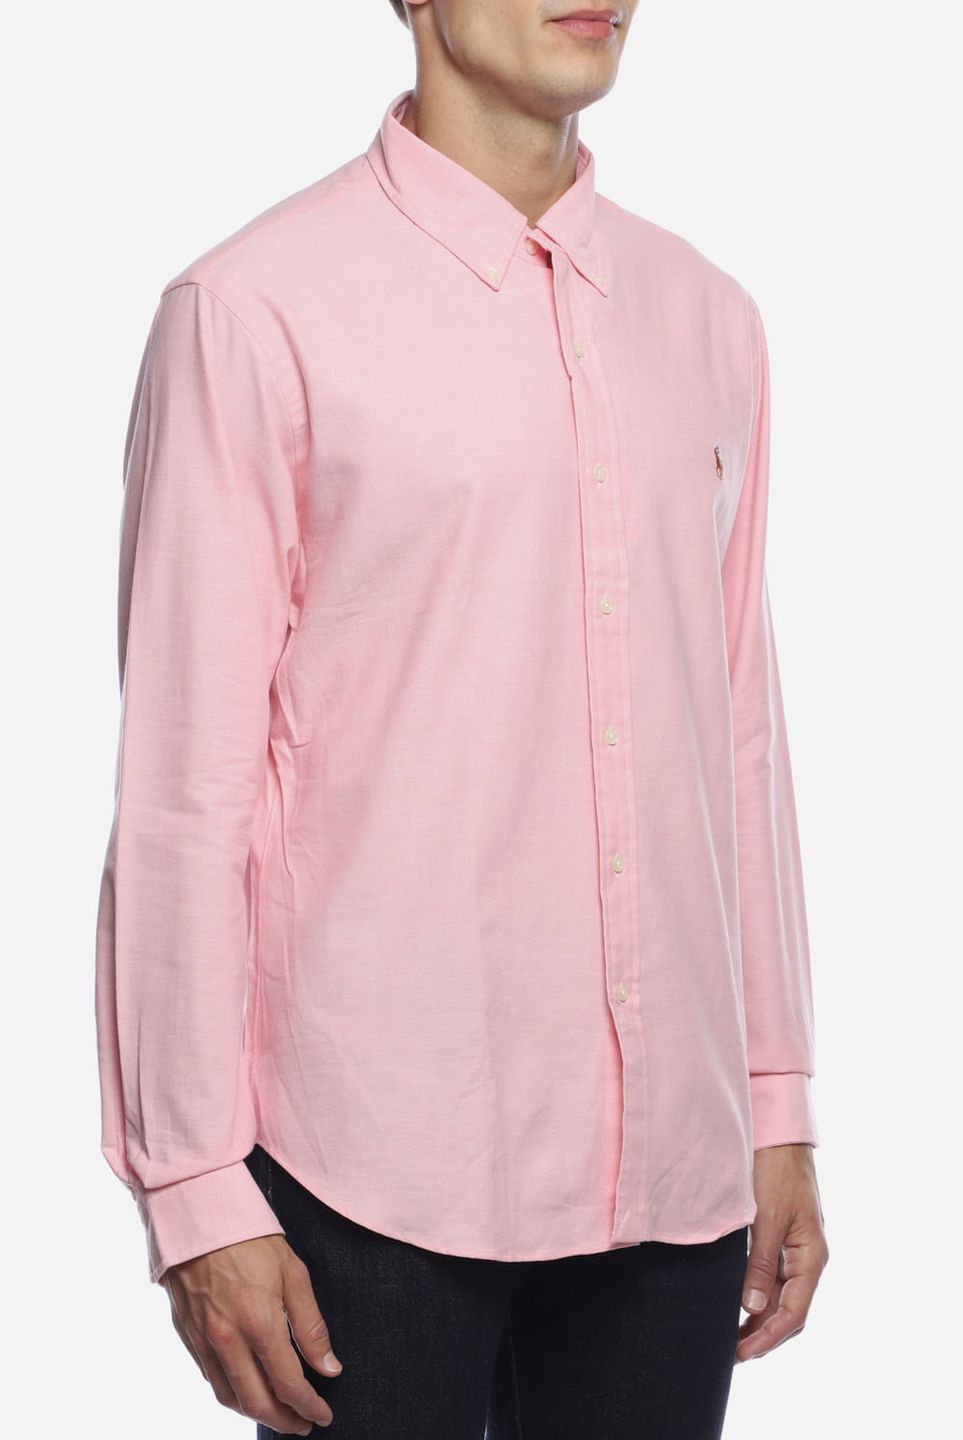 Mens Pink Tops  Next Official Site